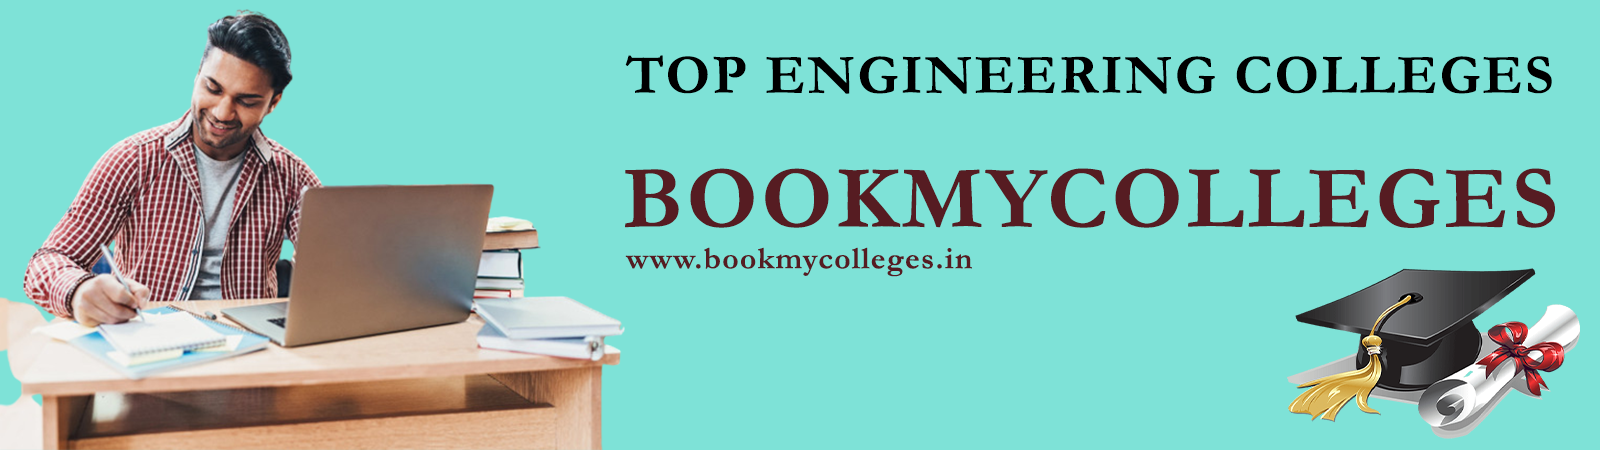 Banner Bookmycolleges 2